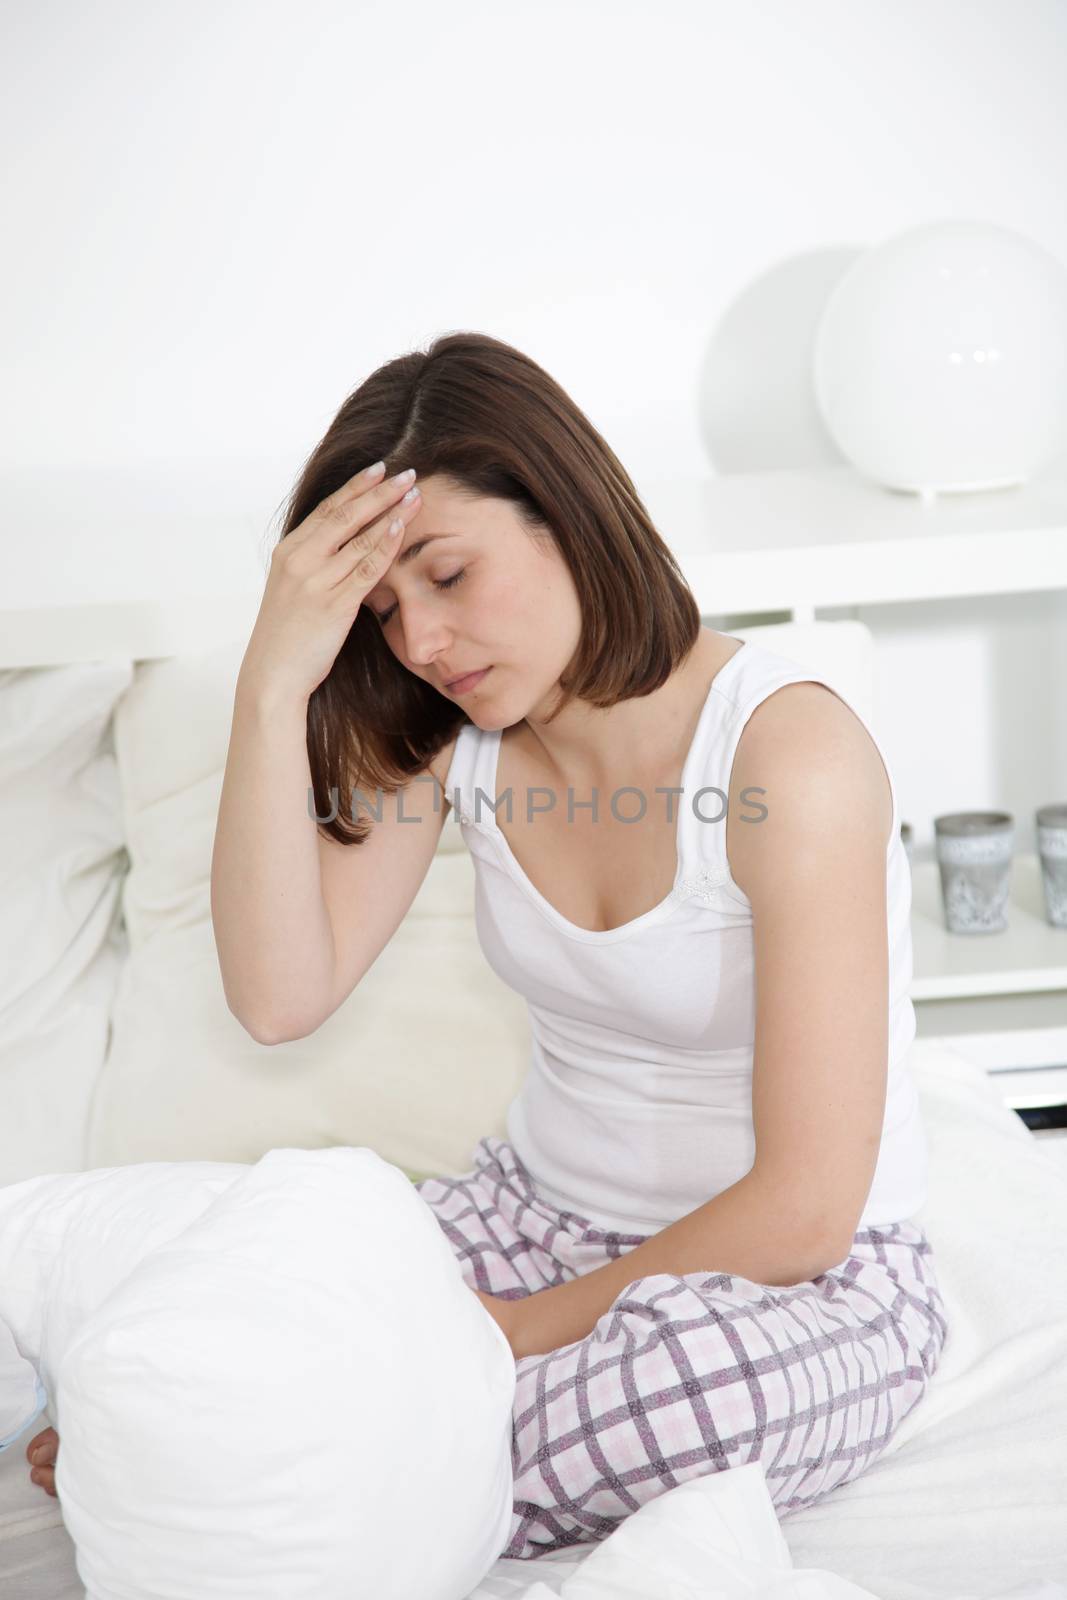 Tired woman with a headache sitting on the edge of her bed in her nightwear holding her head with her hand